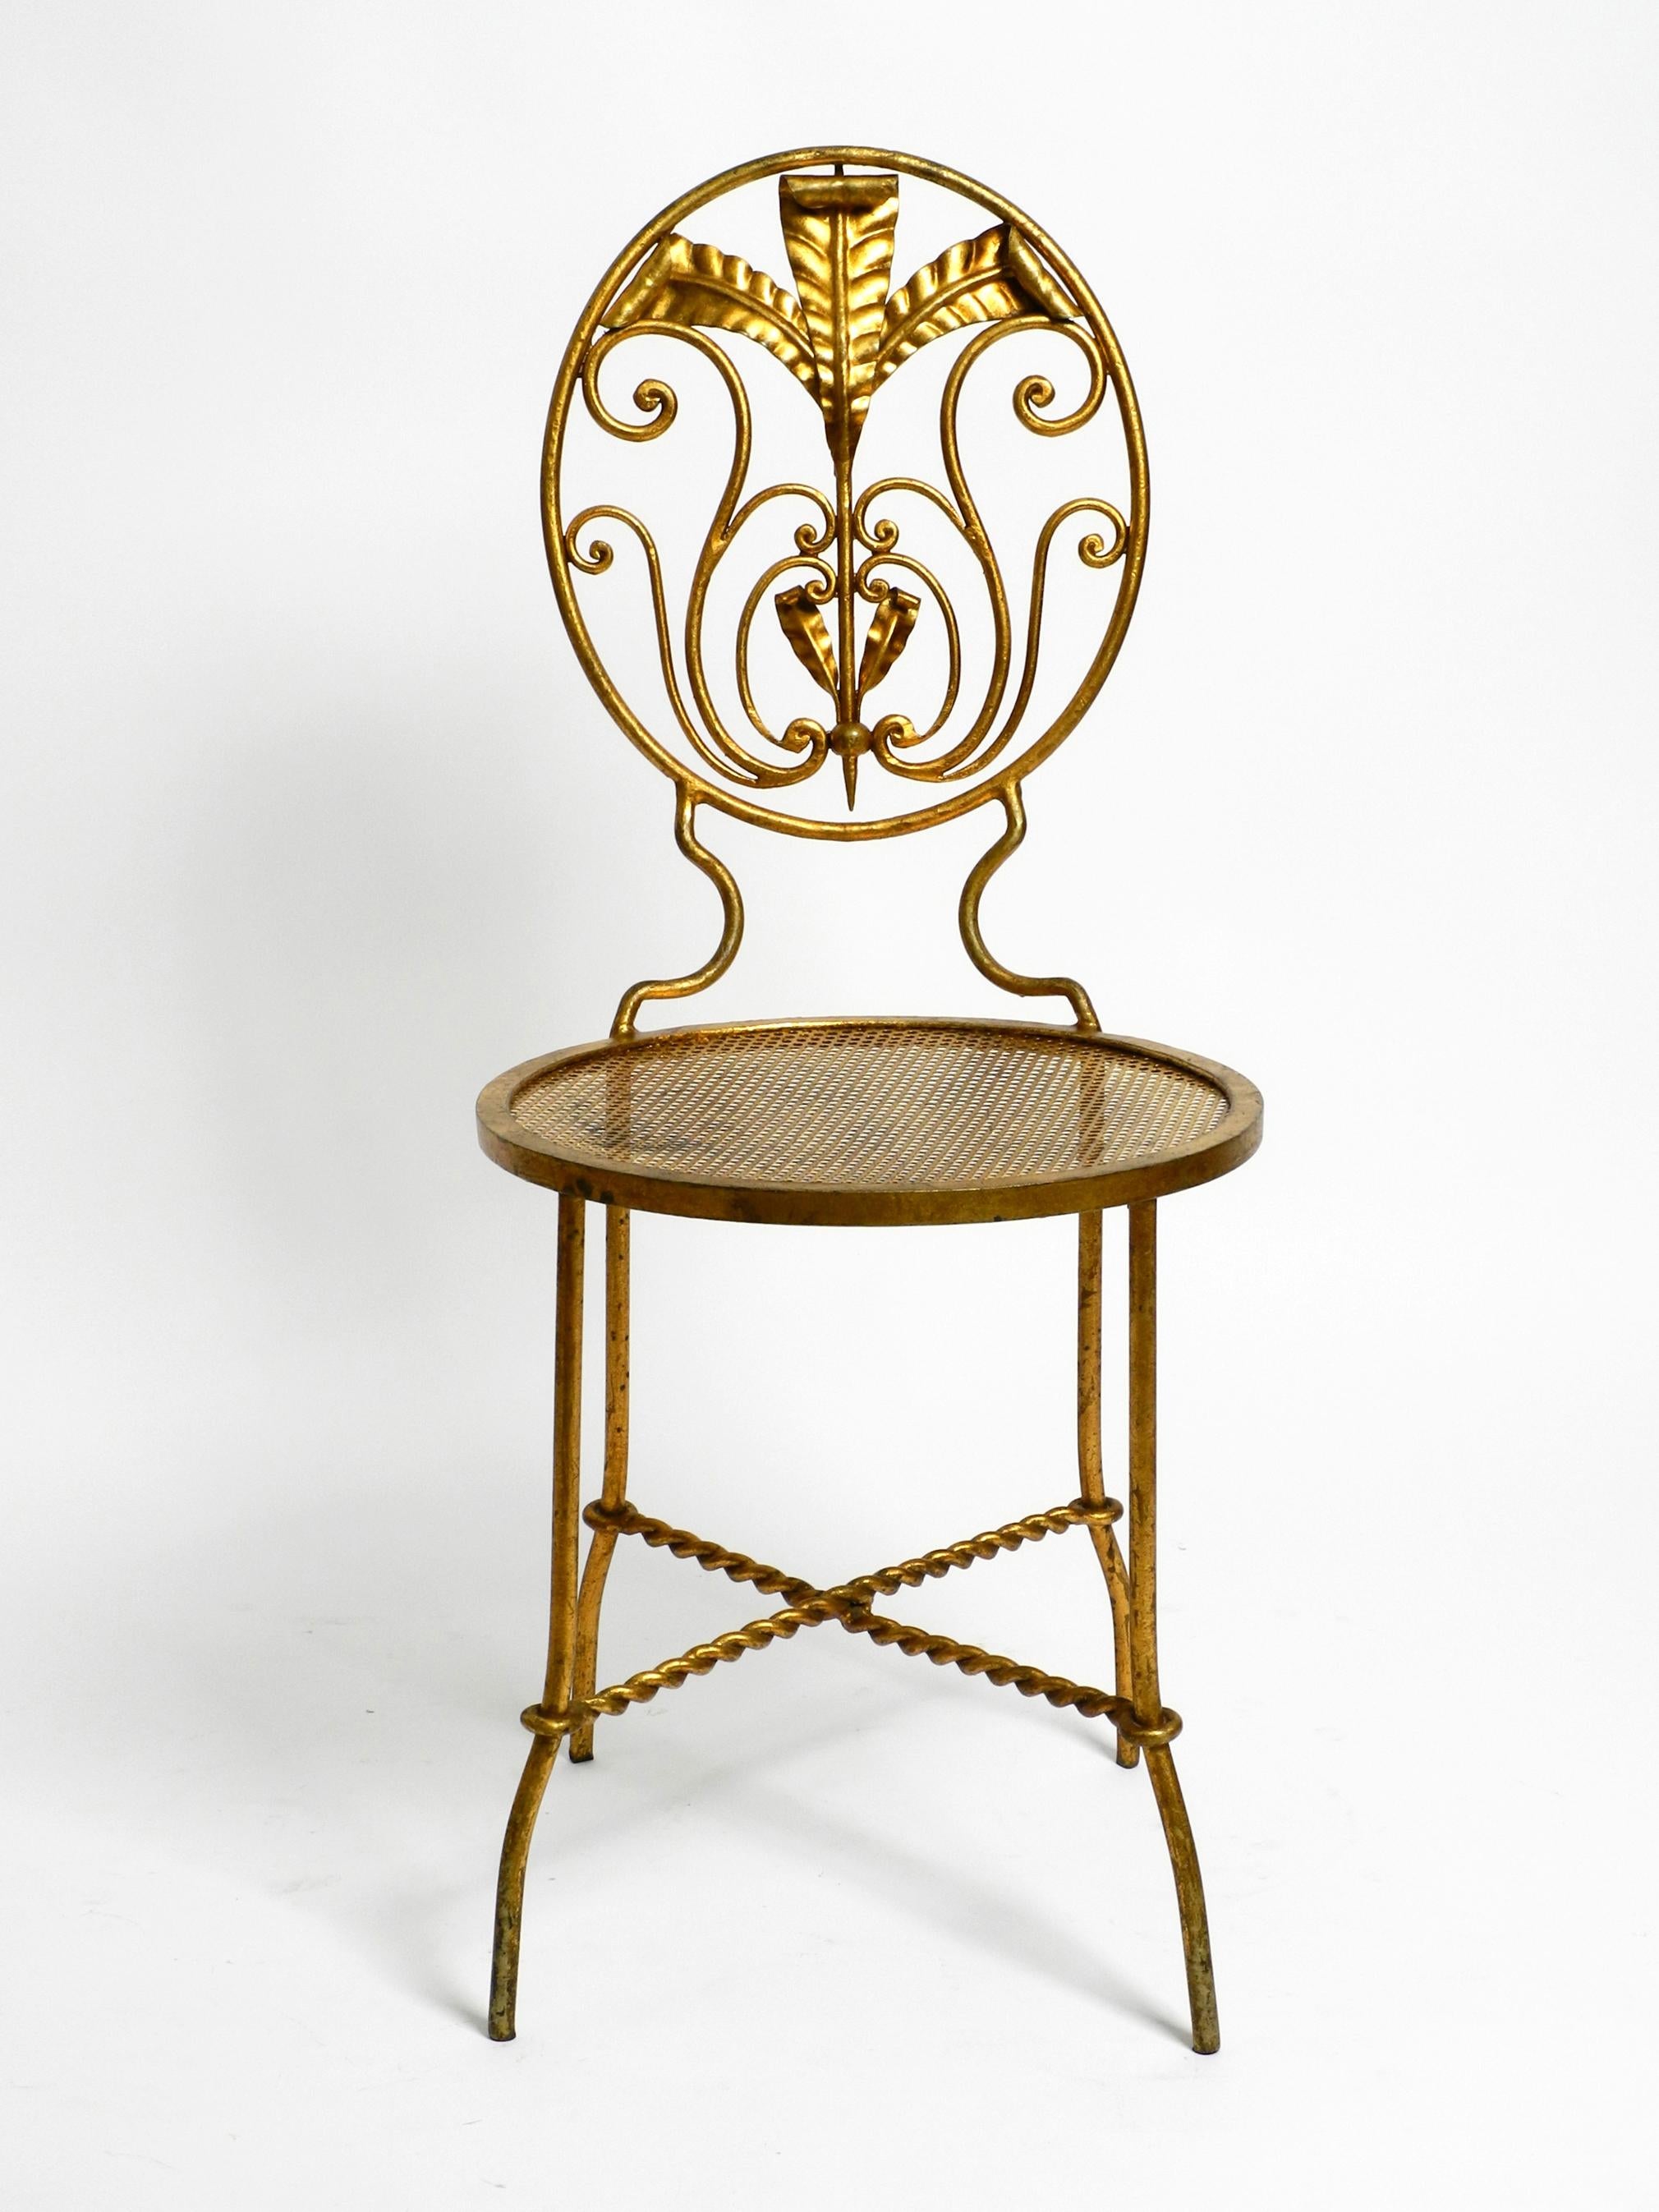 Beautiful Italian 70's Regency Design Gold Plated Wrought Iron Chair For Sale 15